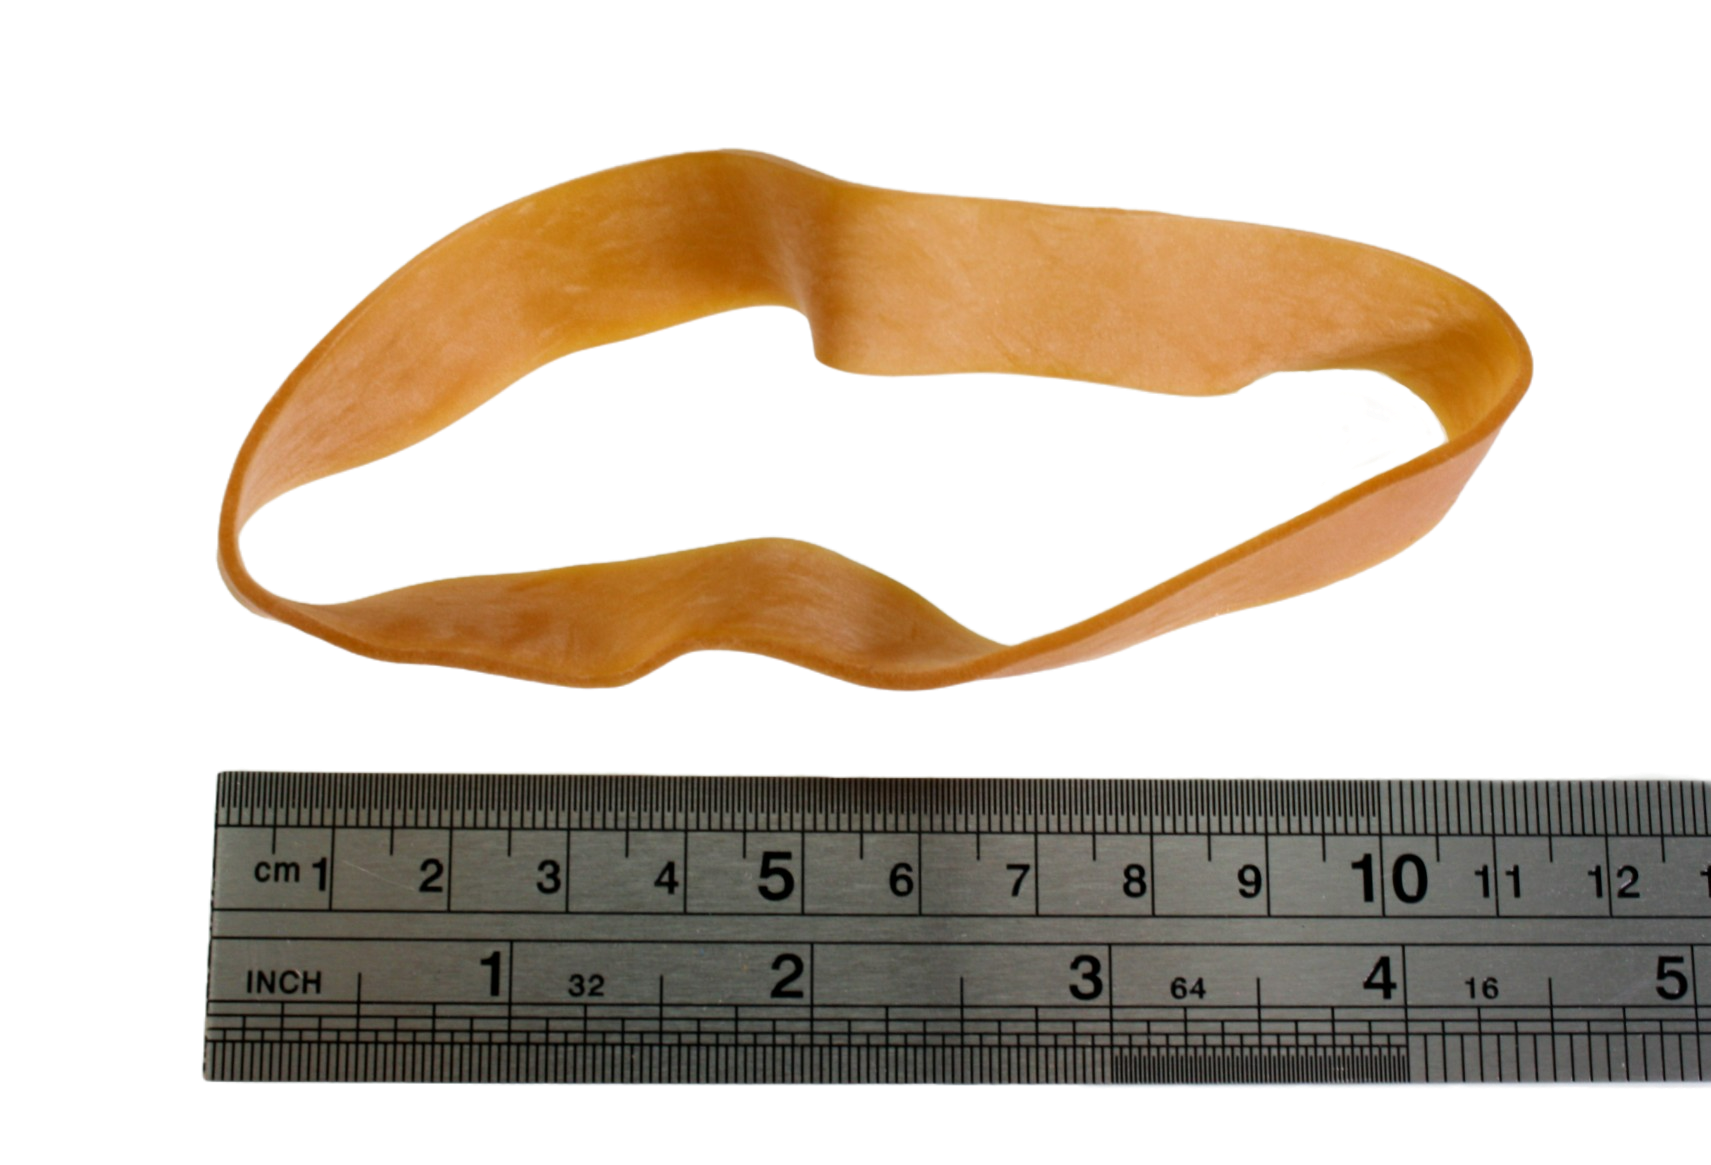 One rubber band next to a metal ruler showing the length to be around 11cm when no tension is applied